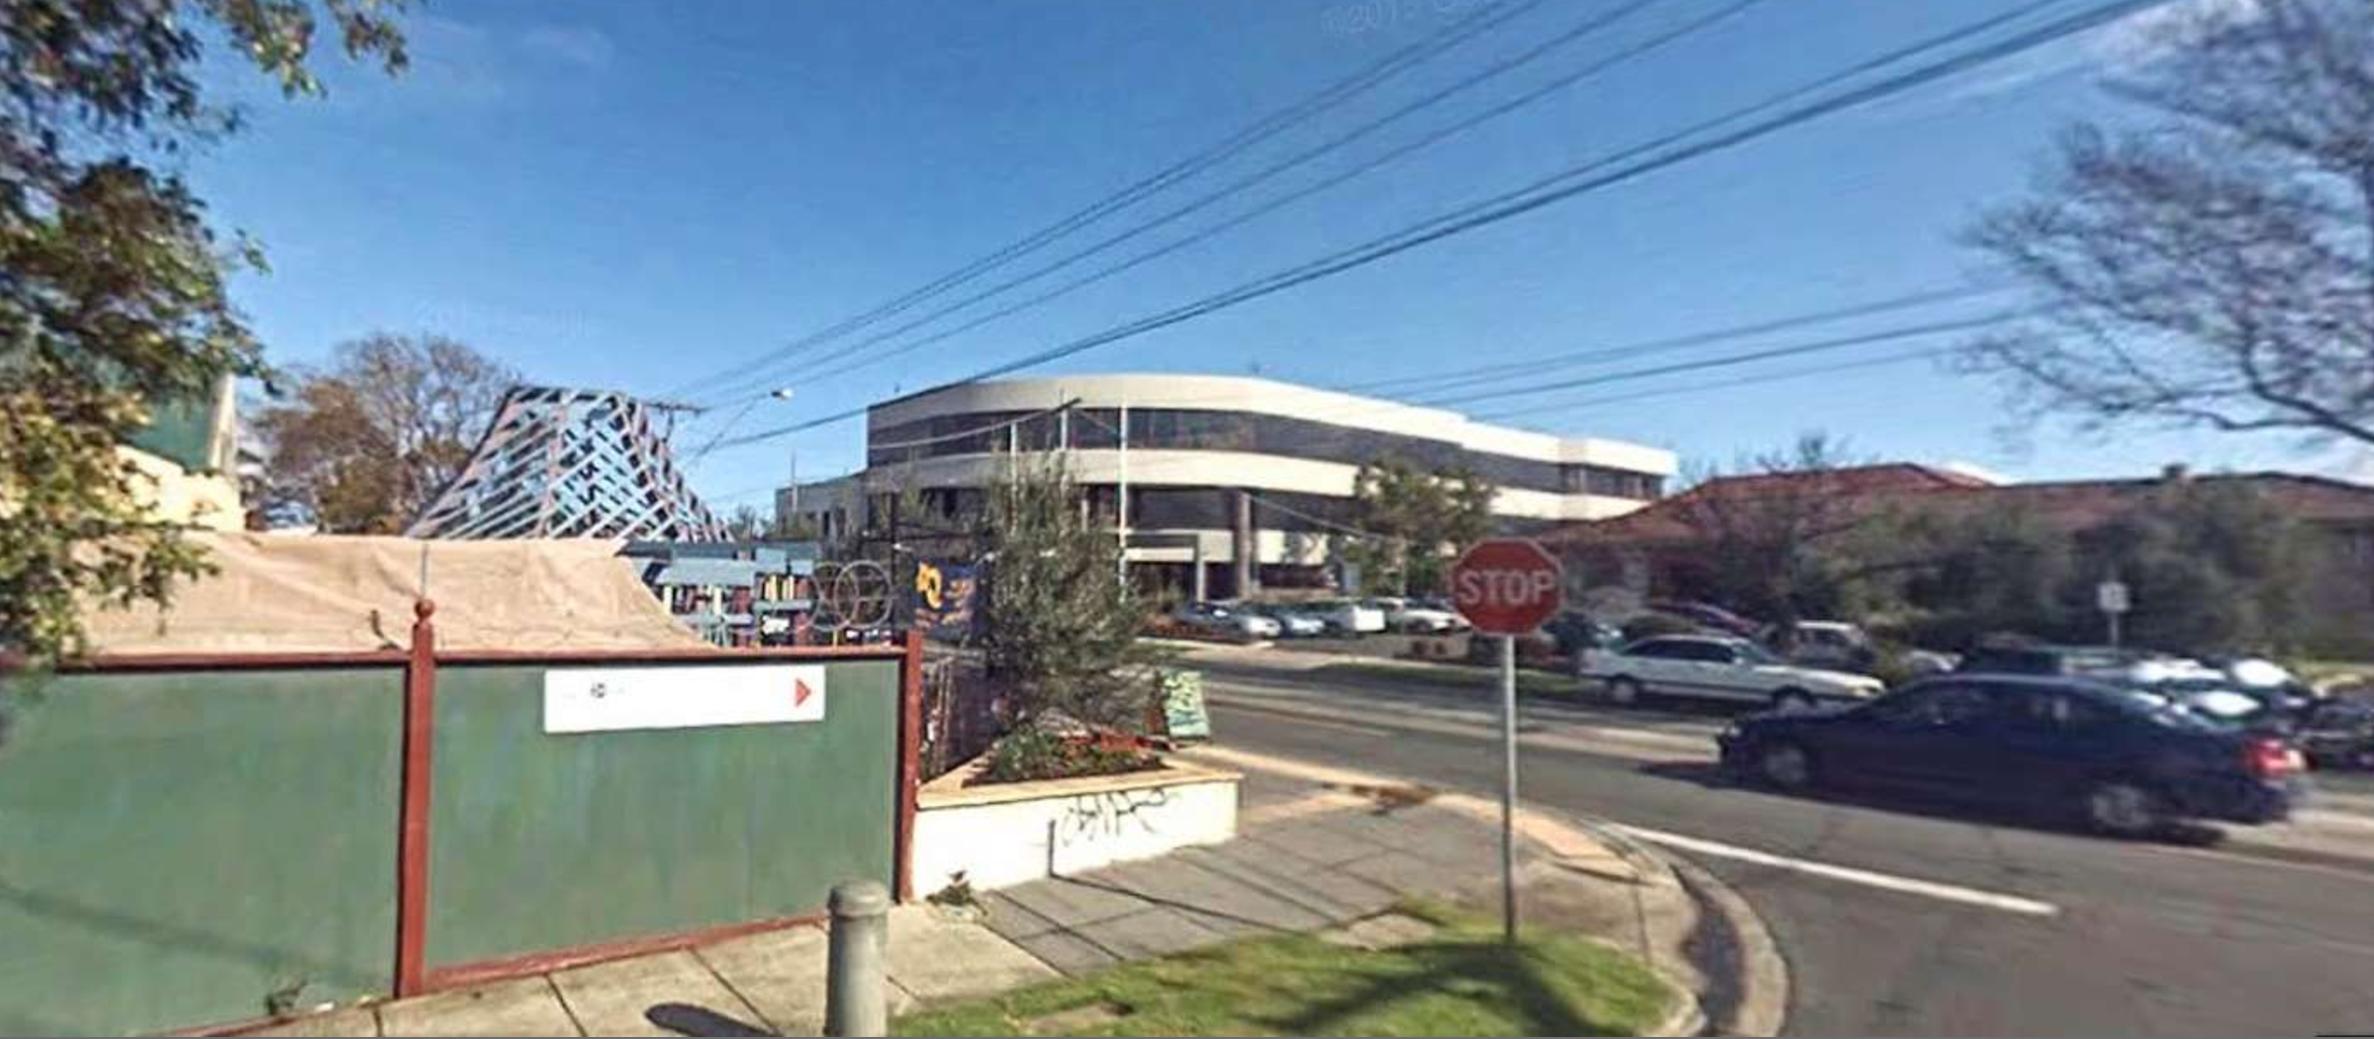 AUS: ‘Bomb proofing’ Melbourne Jewish centre: Government funds $500,000 security wall